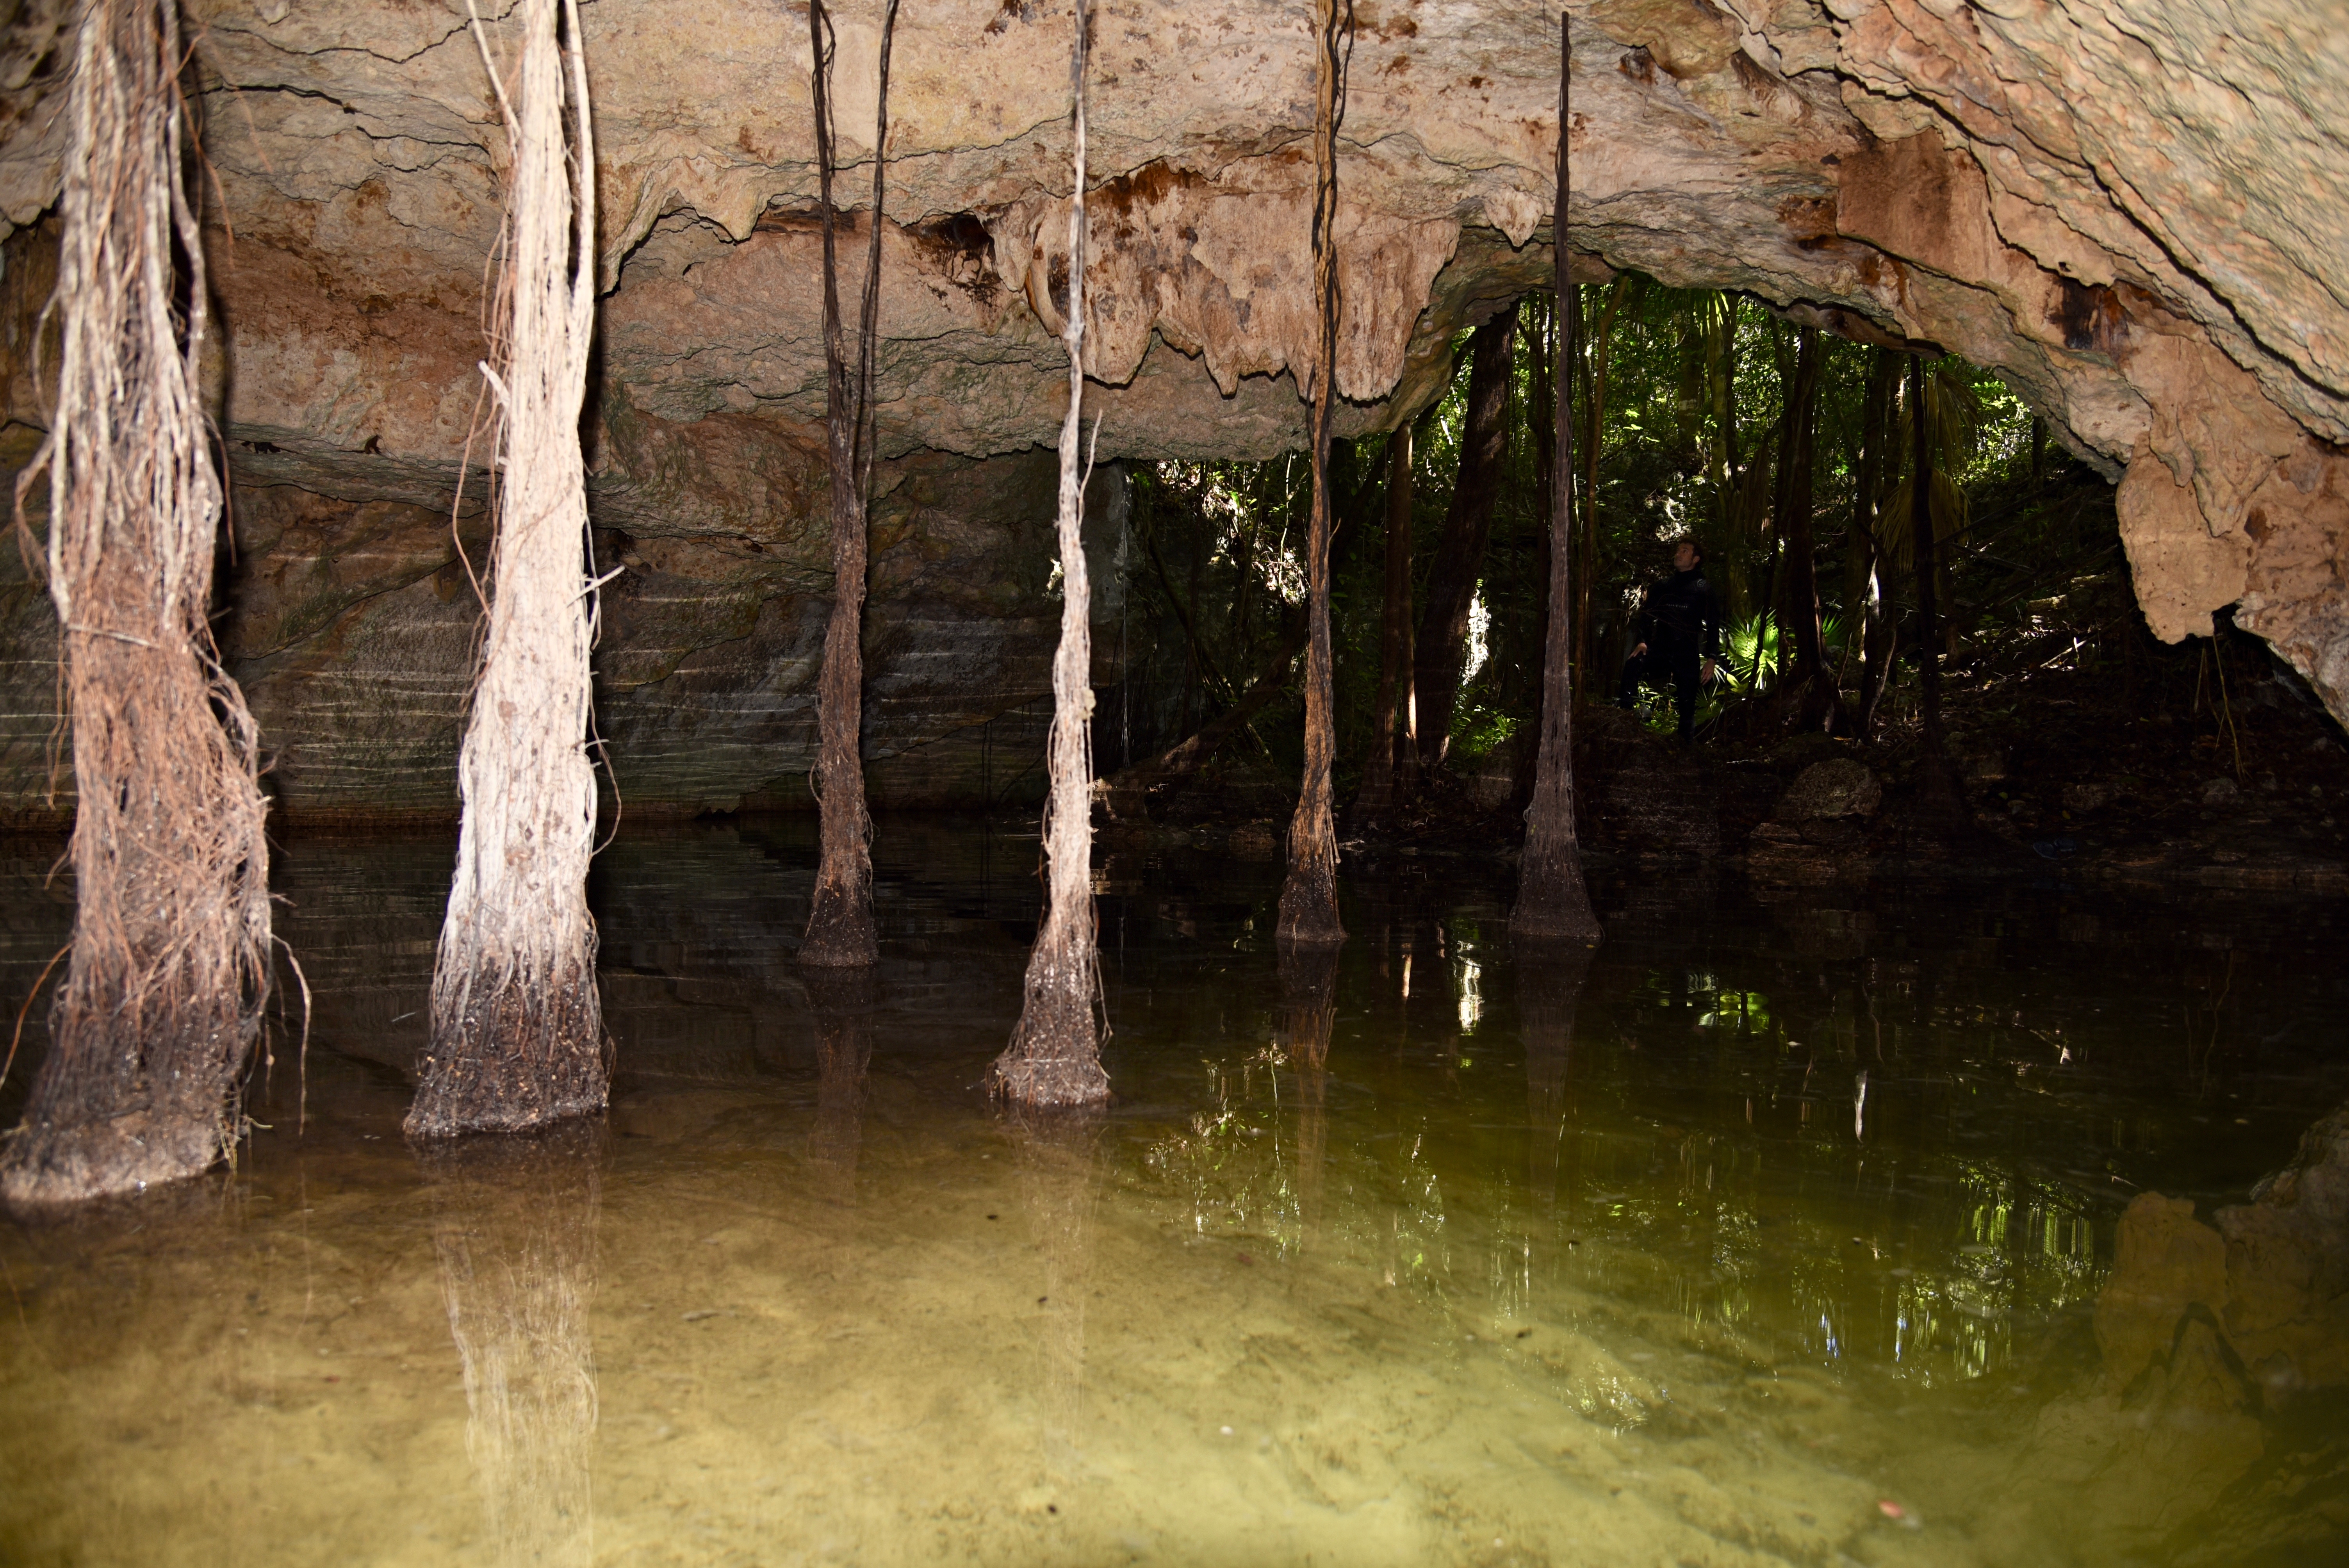 Arch entrance of String of Pearls cenote. Photo by Pierre Constant